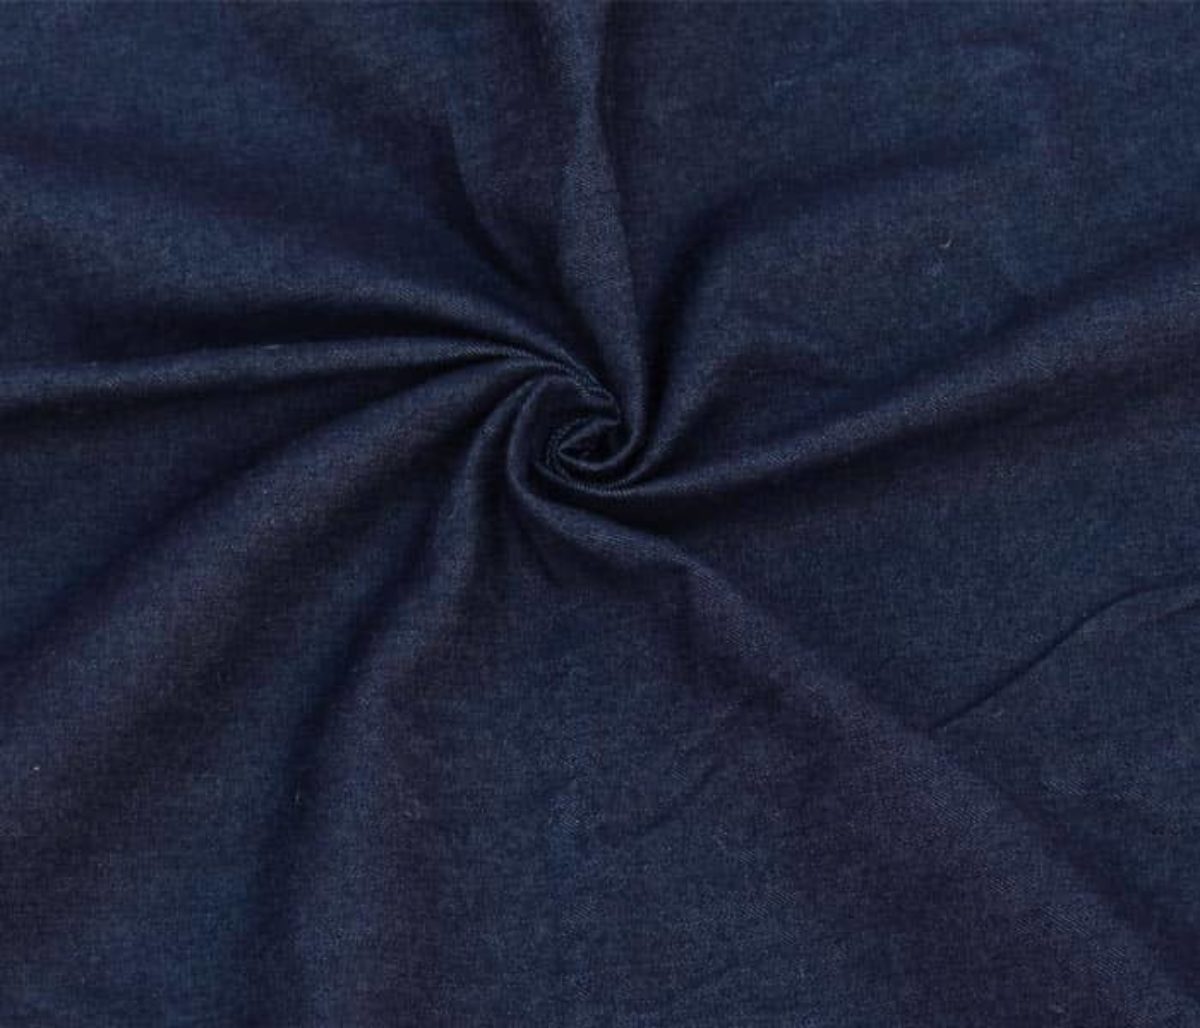 Shaded cotton Stretch Denim Fabric in Surat at best price by Tulsi Saree -  Justdial